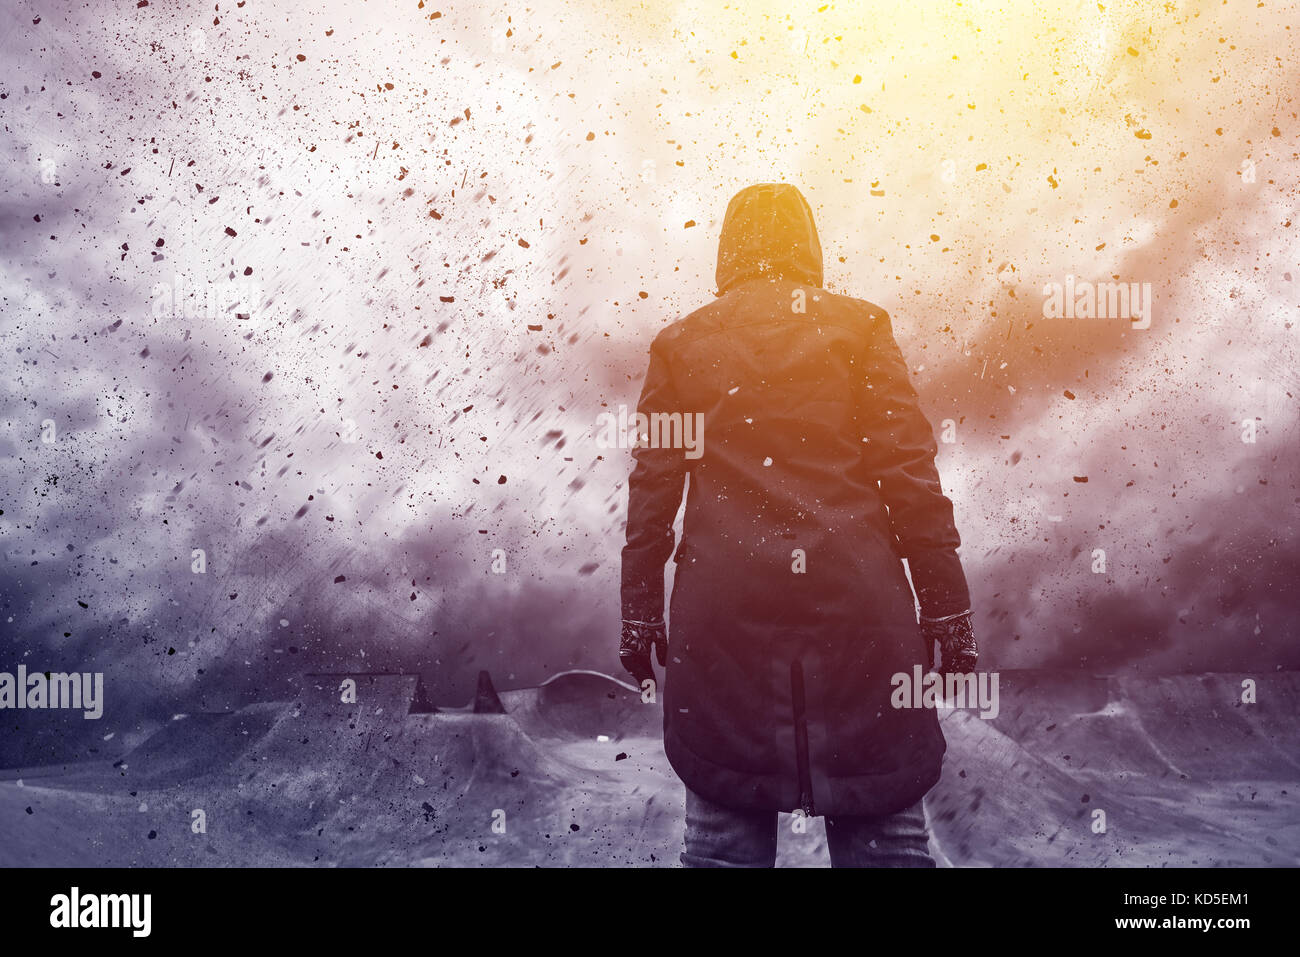 Conceptual image of young female person facing uncertain future, mixed media content with dramatic stormy clouds in background Stock Photo